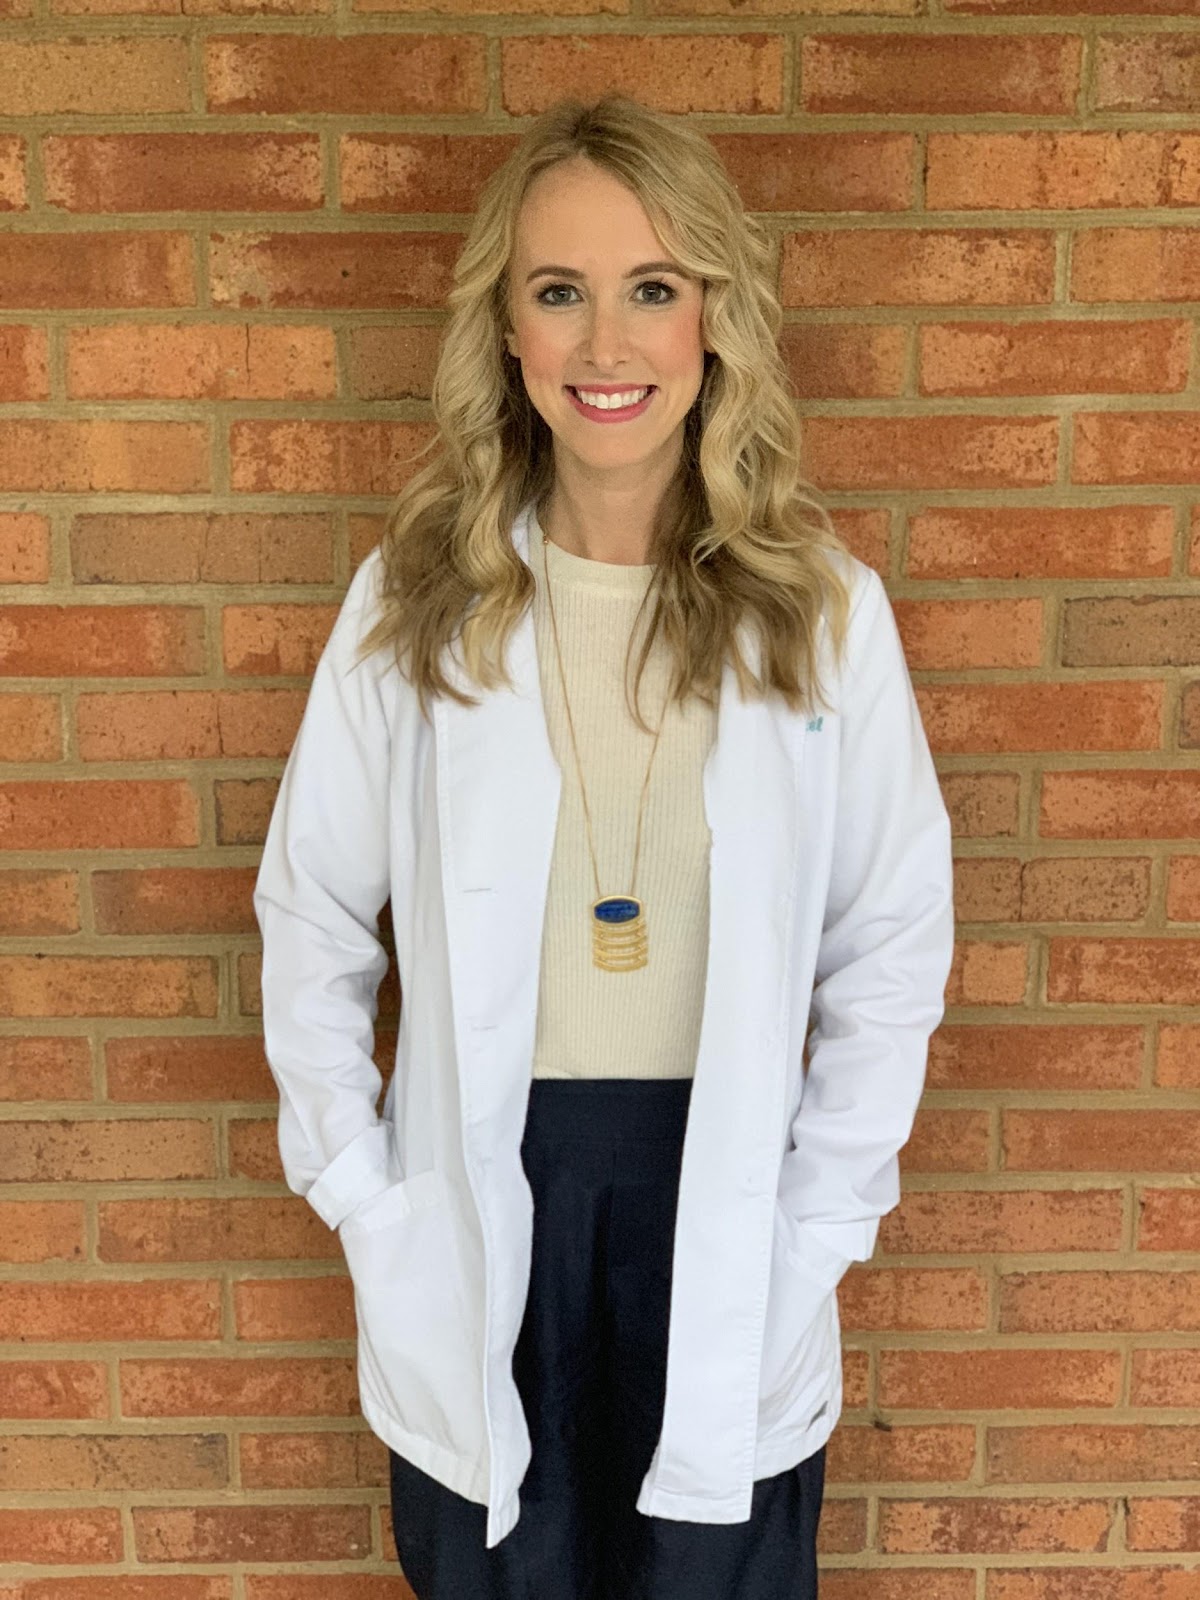 Photo of author Whitney Weingarten FNP-C smiling and wearing a white coat.